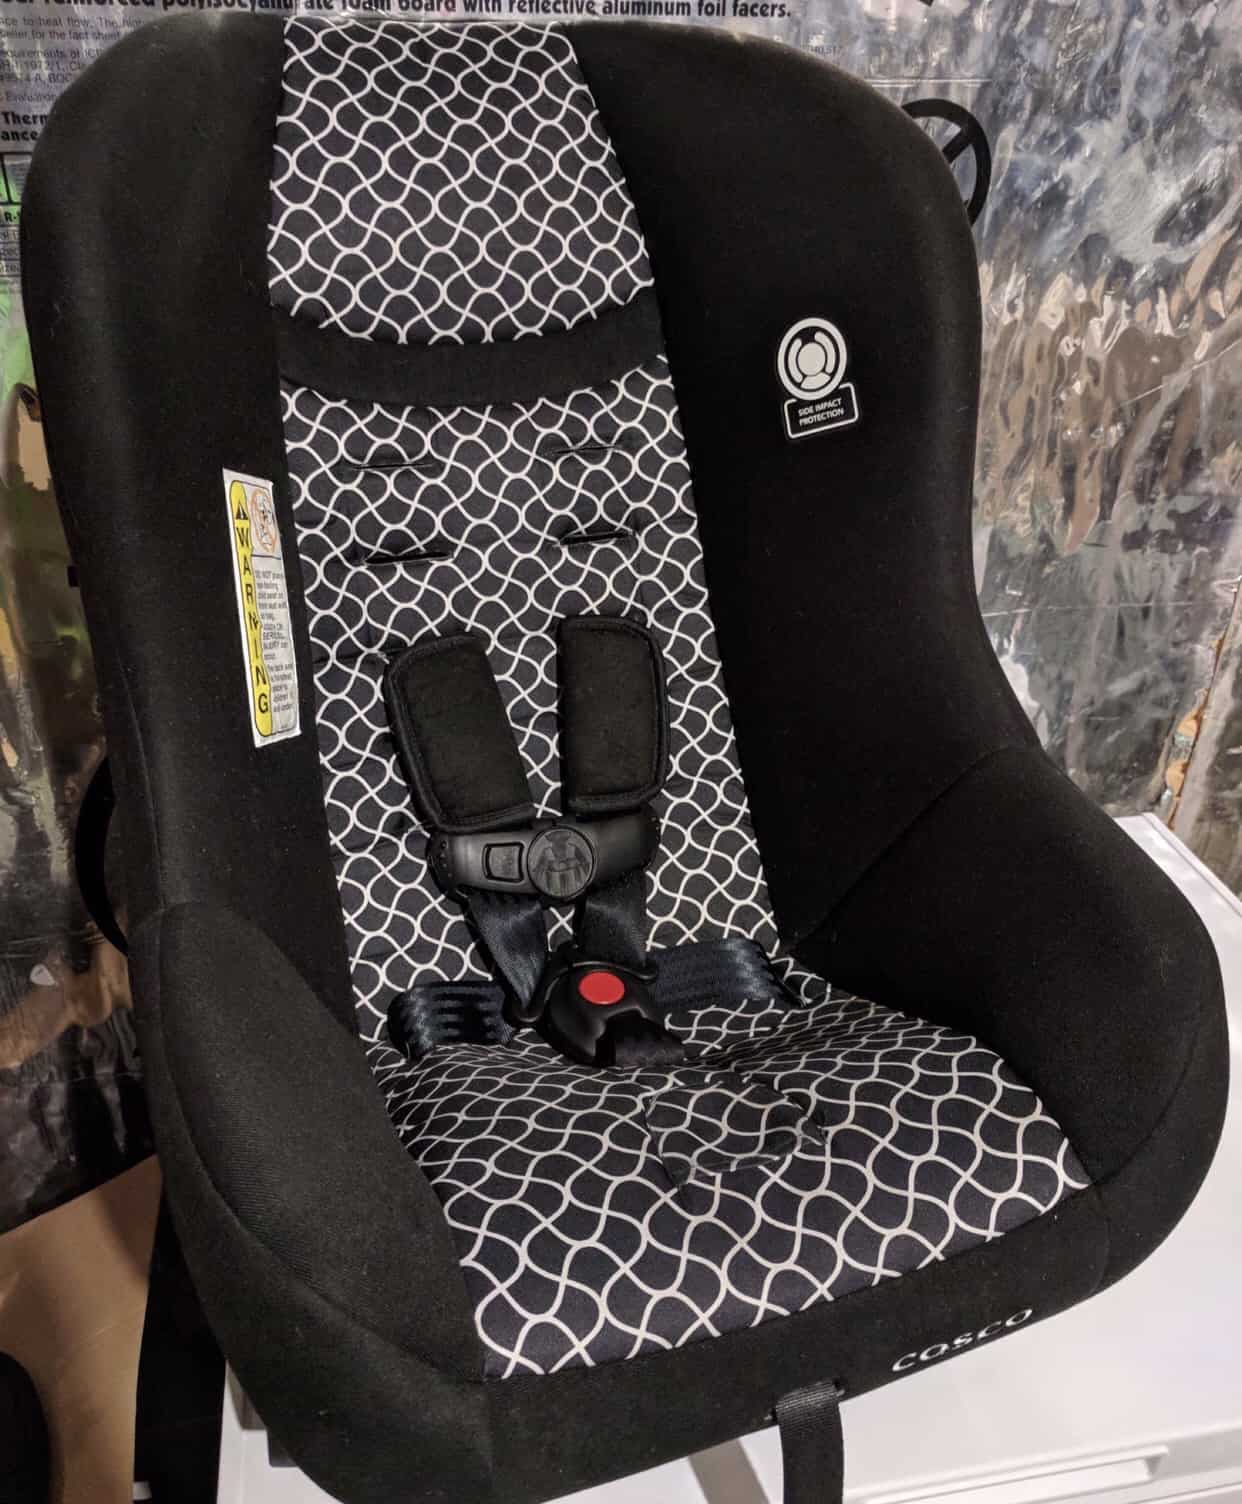 Cosco Scenera Next Review Car Seats For The Littles,Bathroom Decorating Ideas